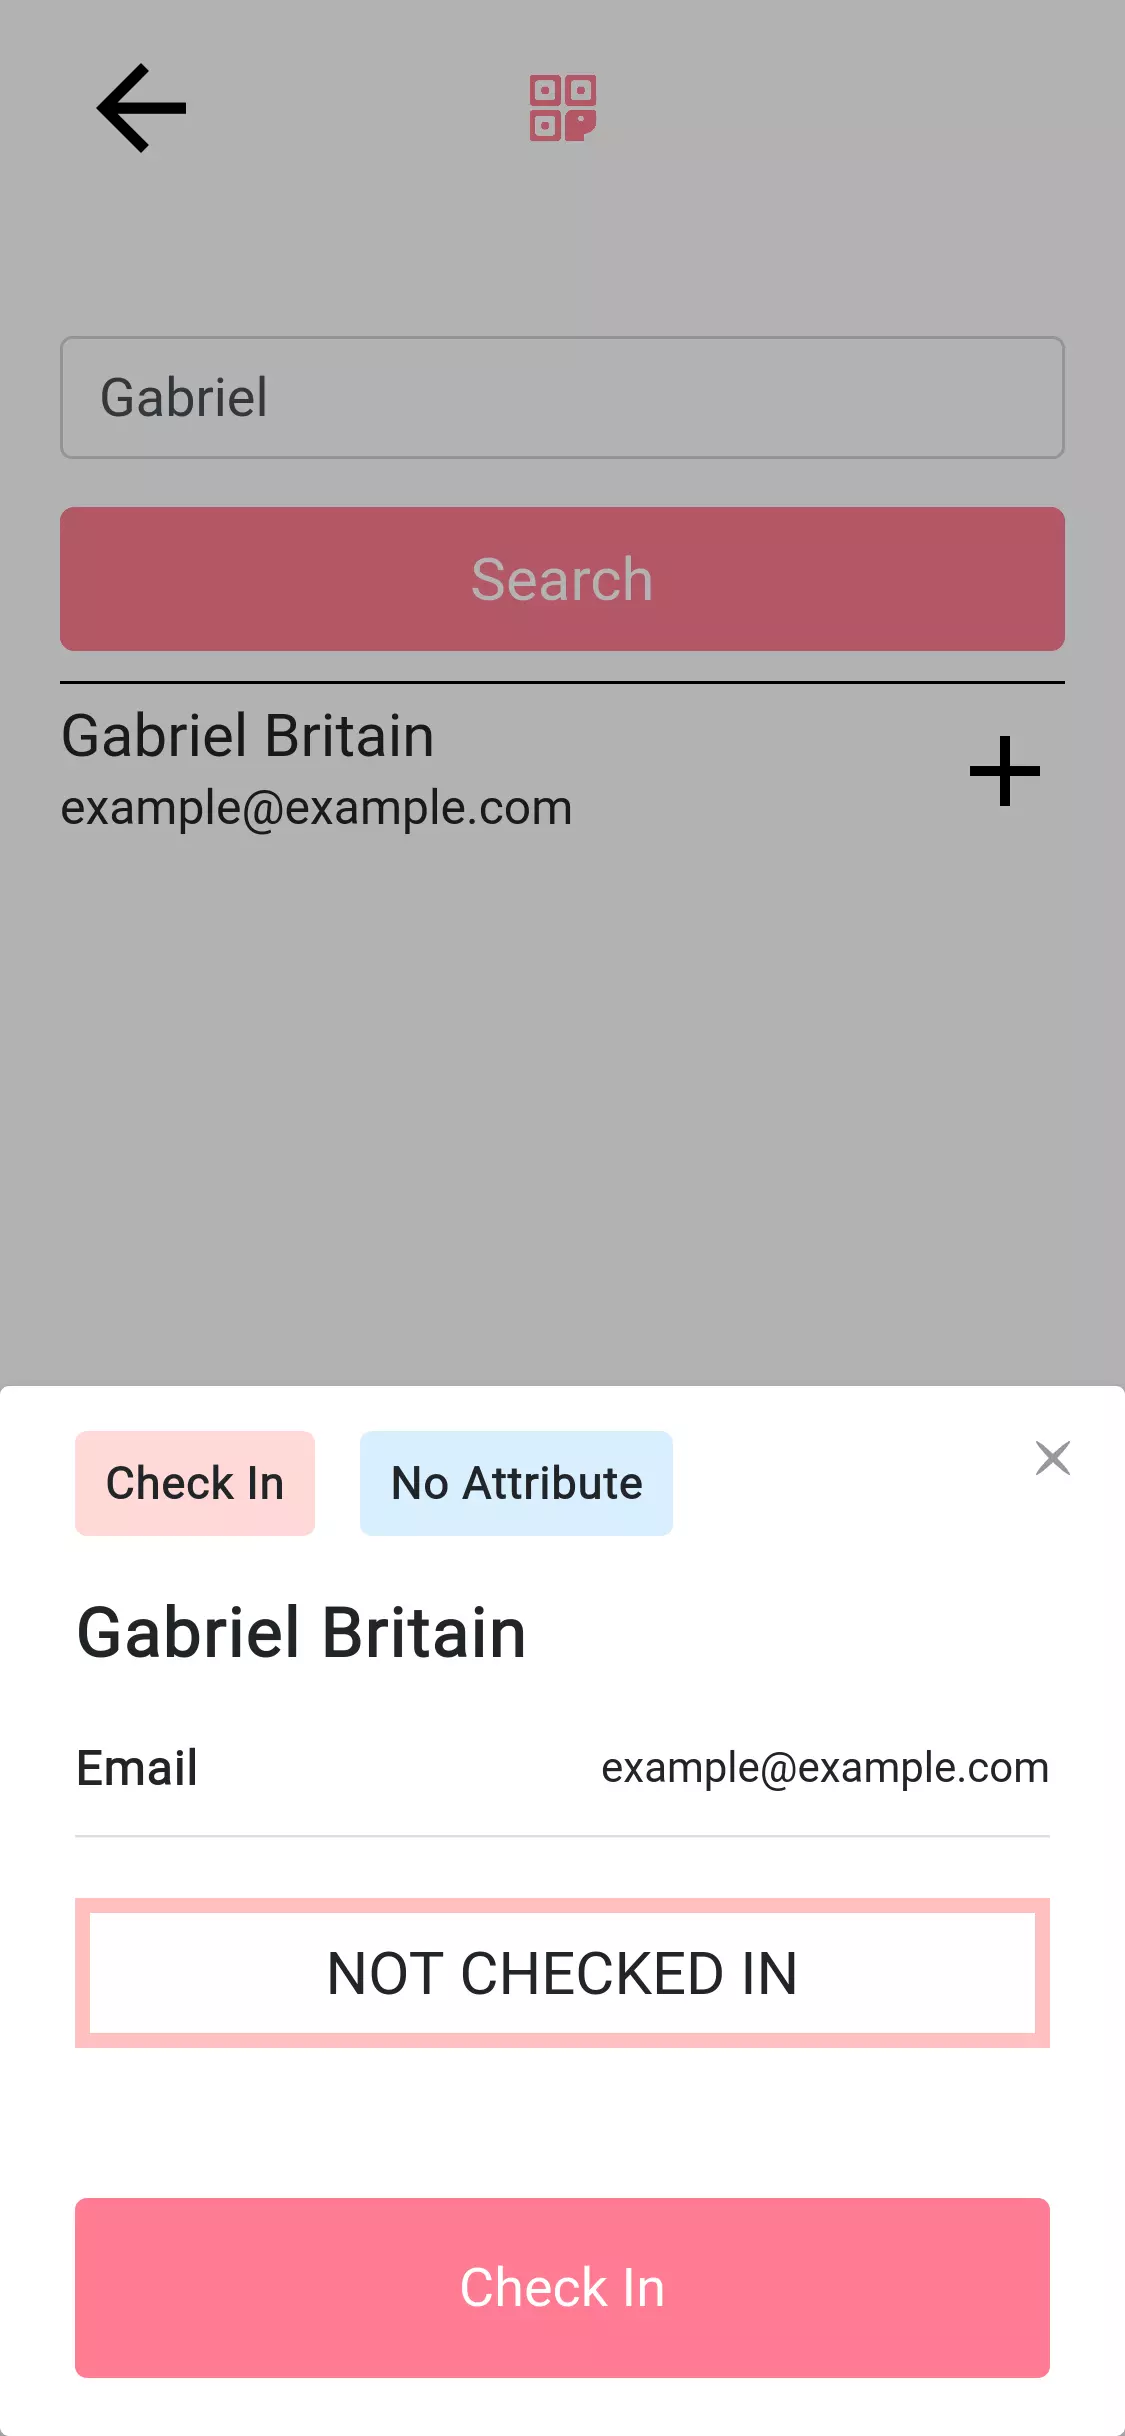 A screenshot of the TAMUhack QR code scanning application, codenamed 'Rattle'. The screenshot has two dropdowns to configure rapid scanning.